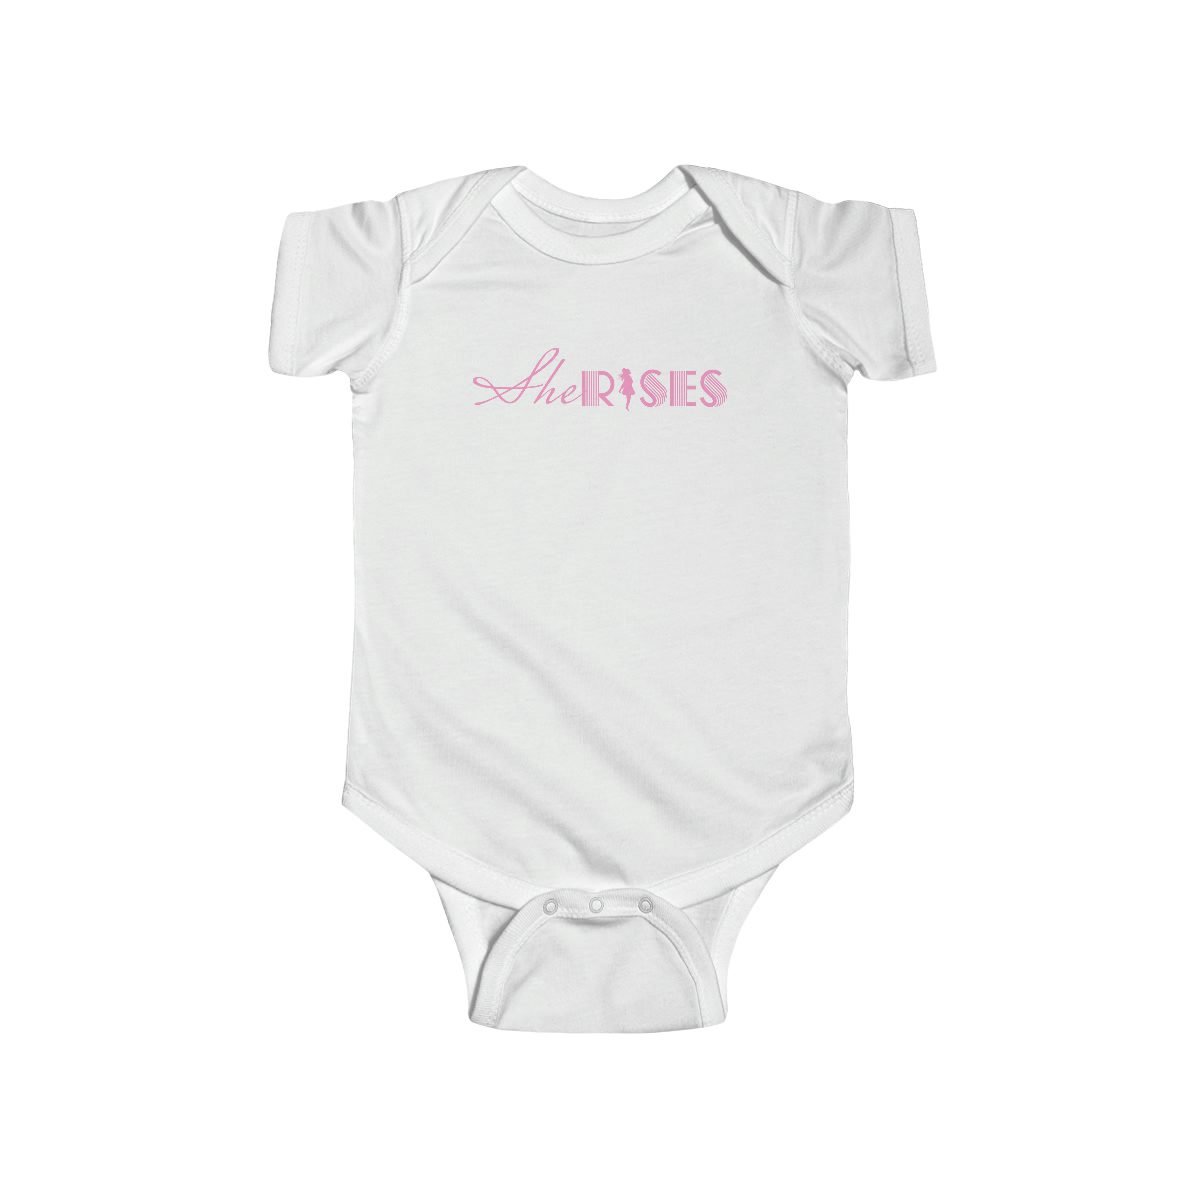 His Place Women’s Ministry – She Rises Infant Jersey Bodysuit